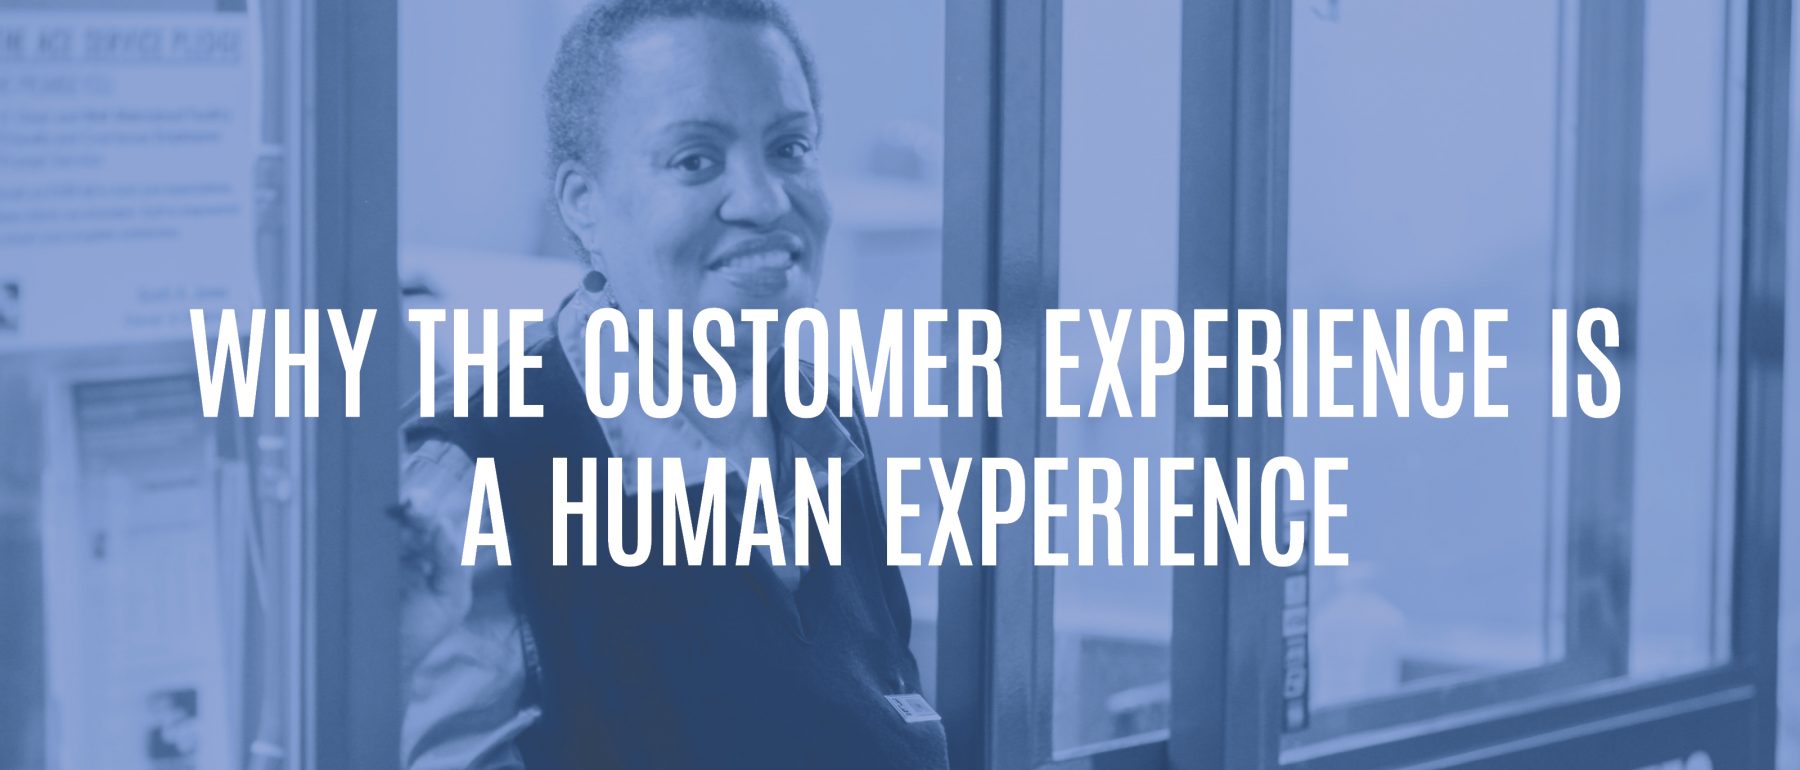 Why the Customer Experience is a Human Experience